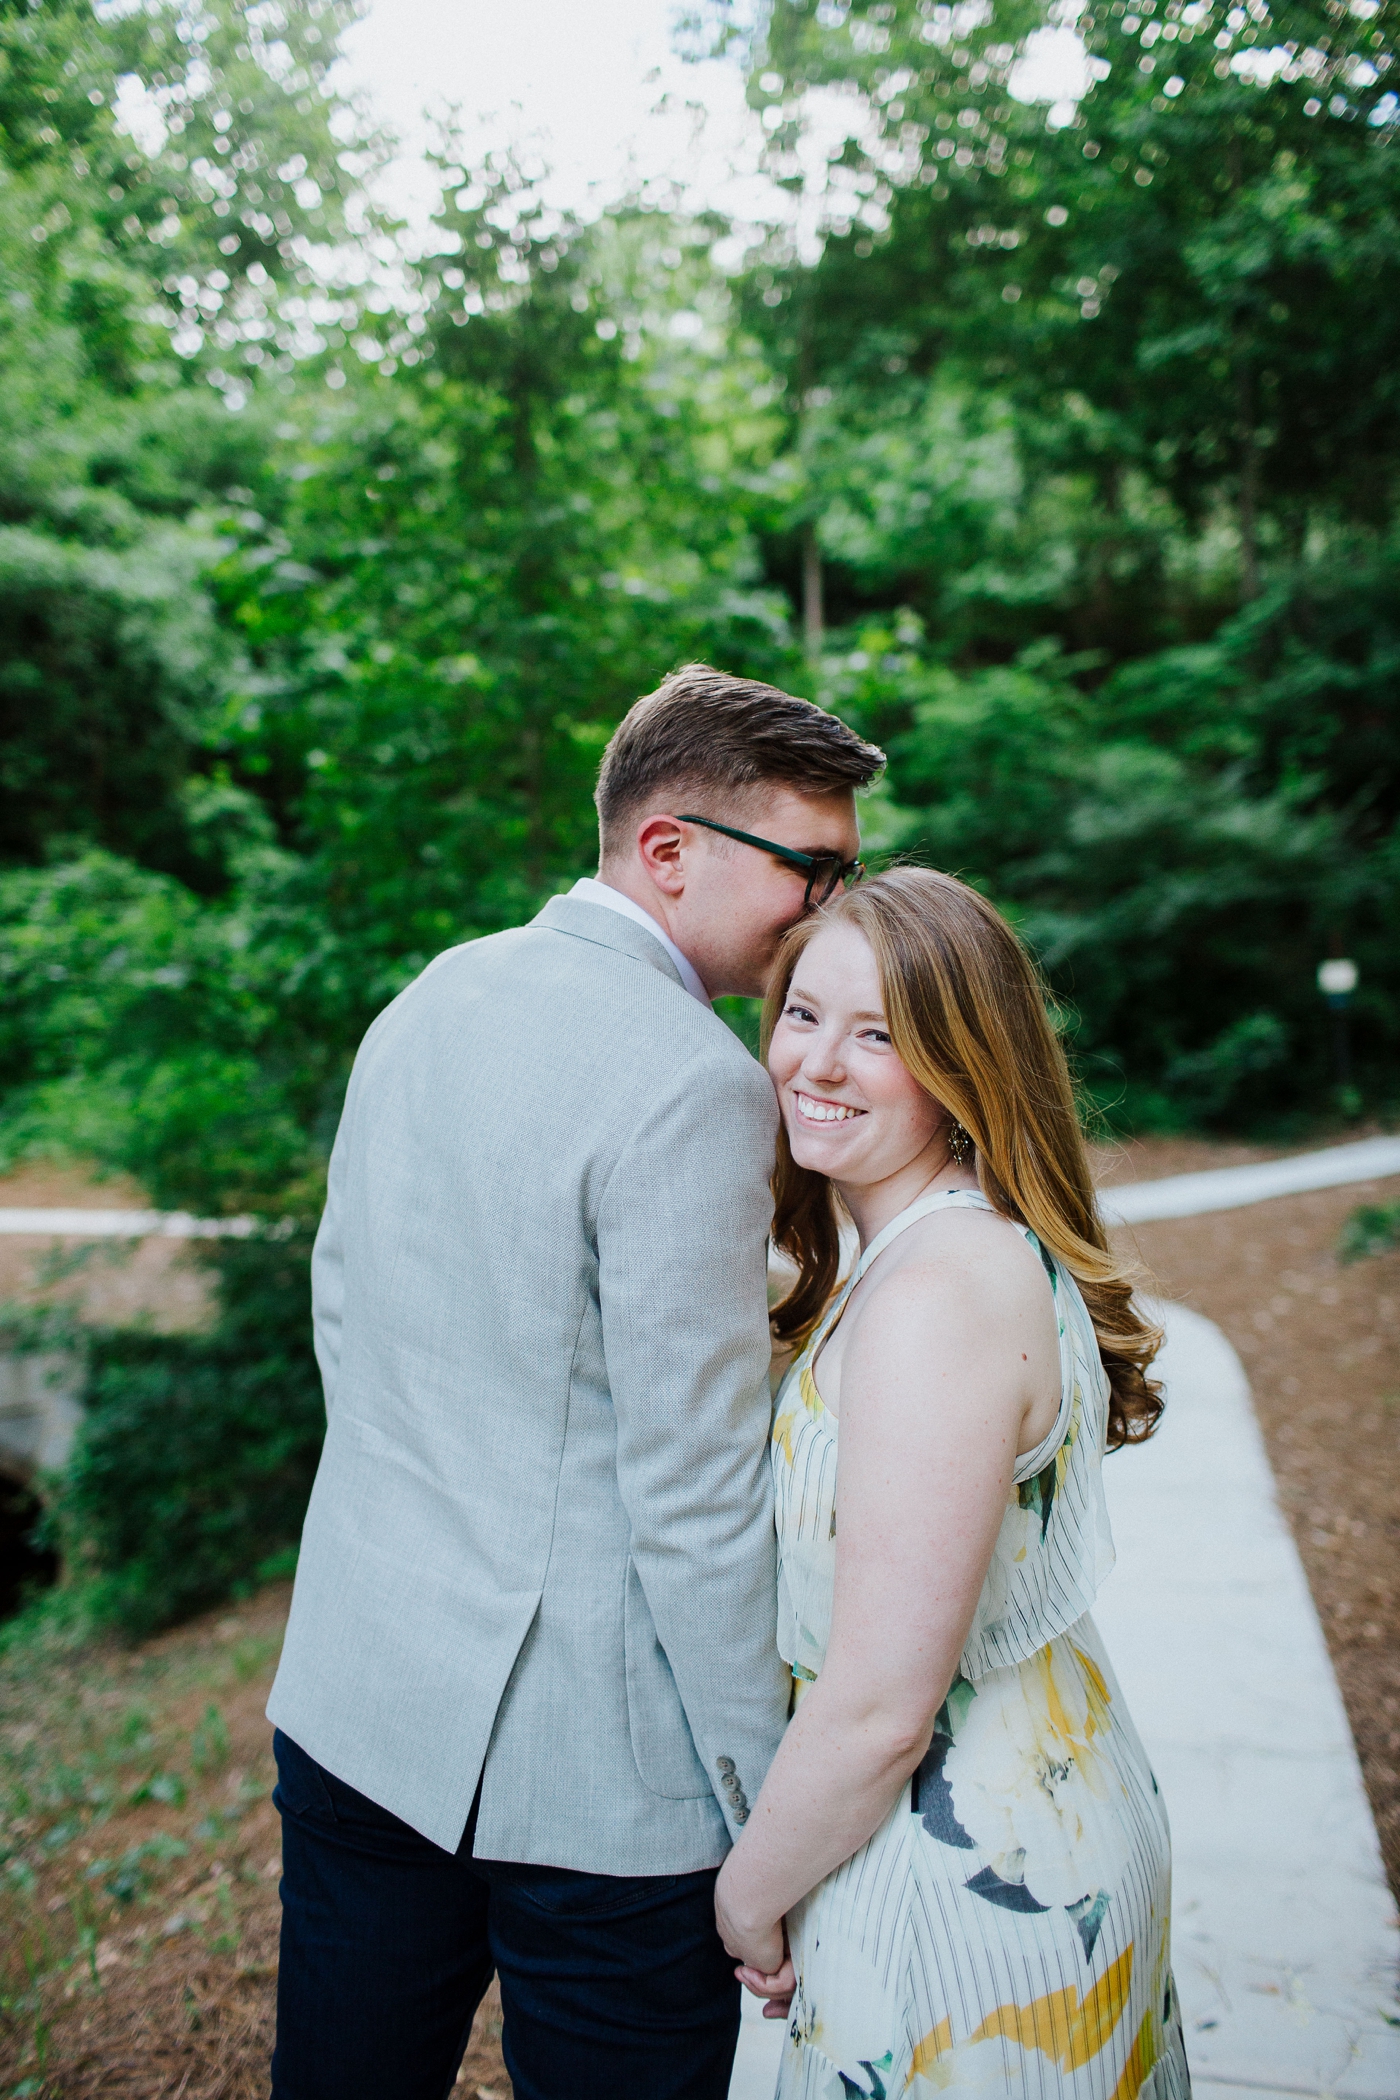 Maddie & Henry’s Inman Park Engagement Session by Izzy & Co.